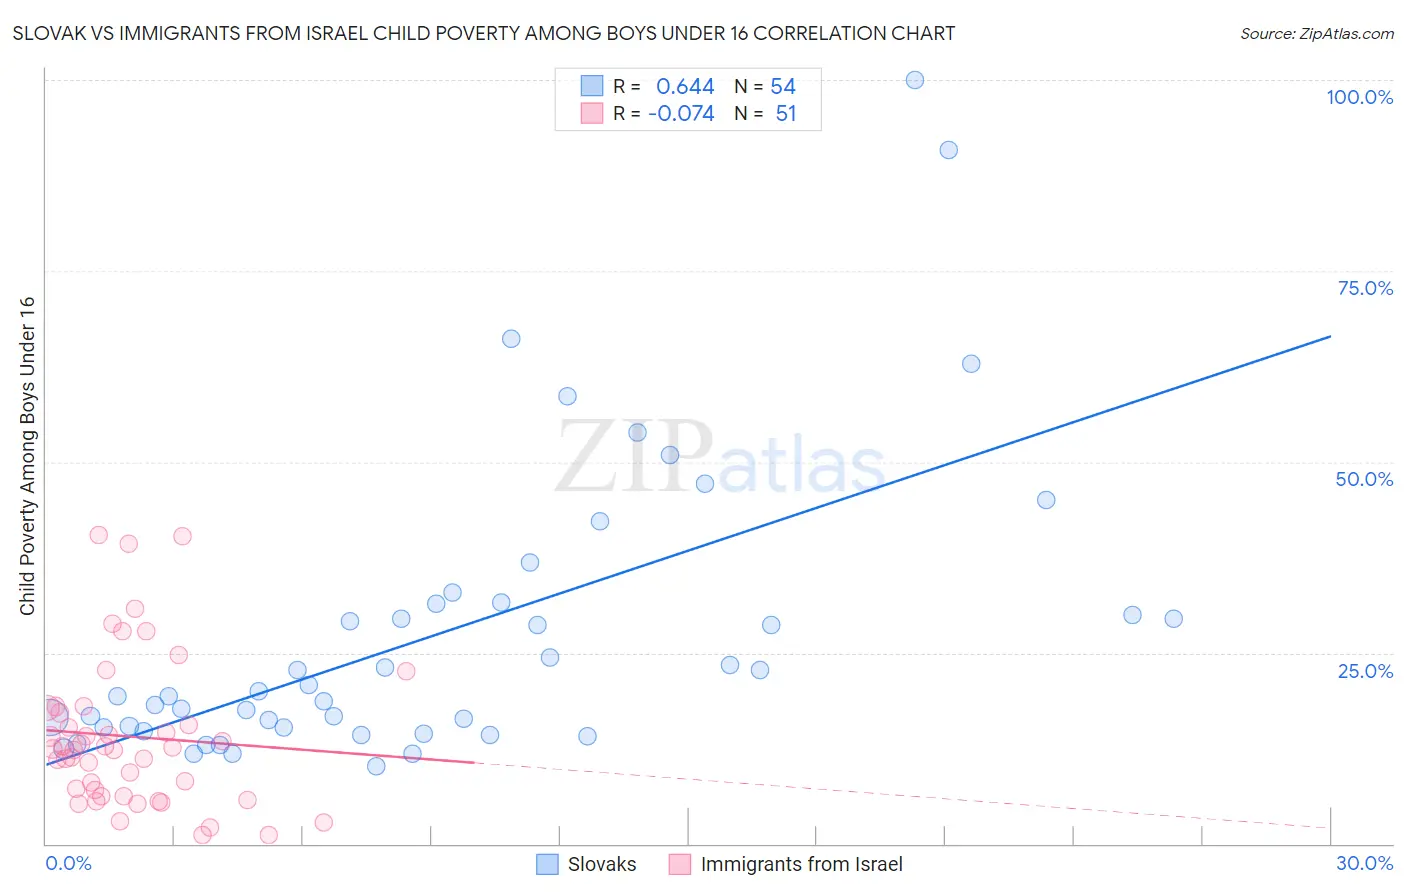 Slovak vs Immigrants from Israel Child Poverty Among Boys Under 16